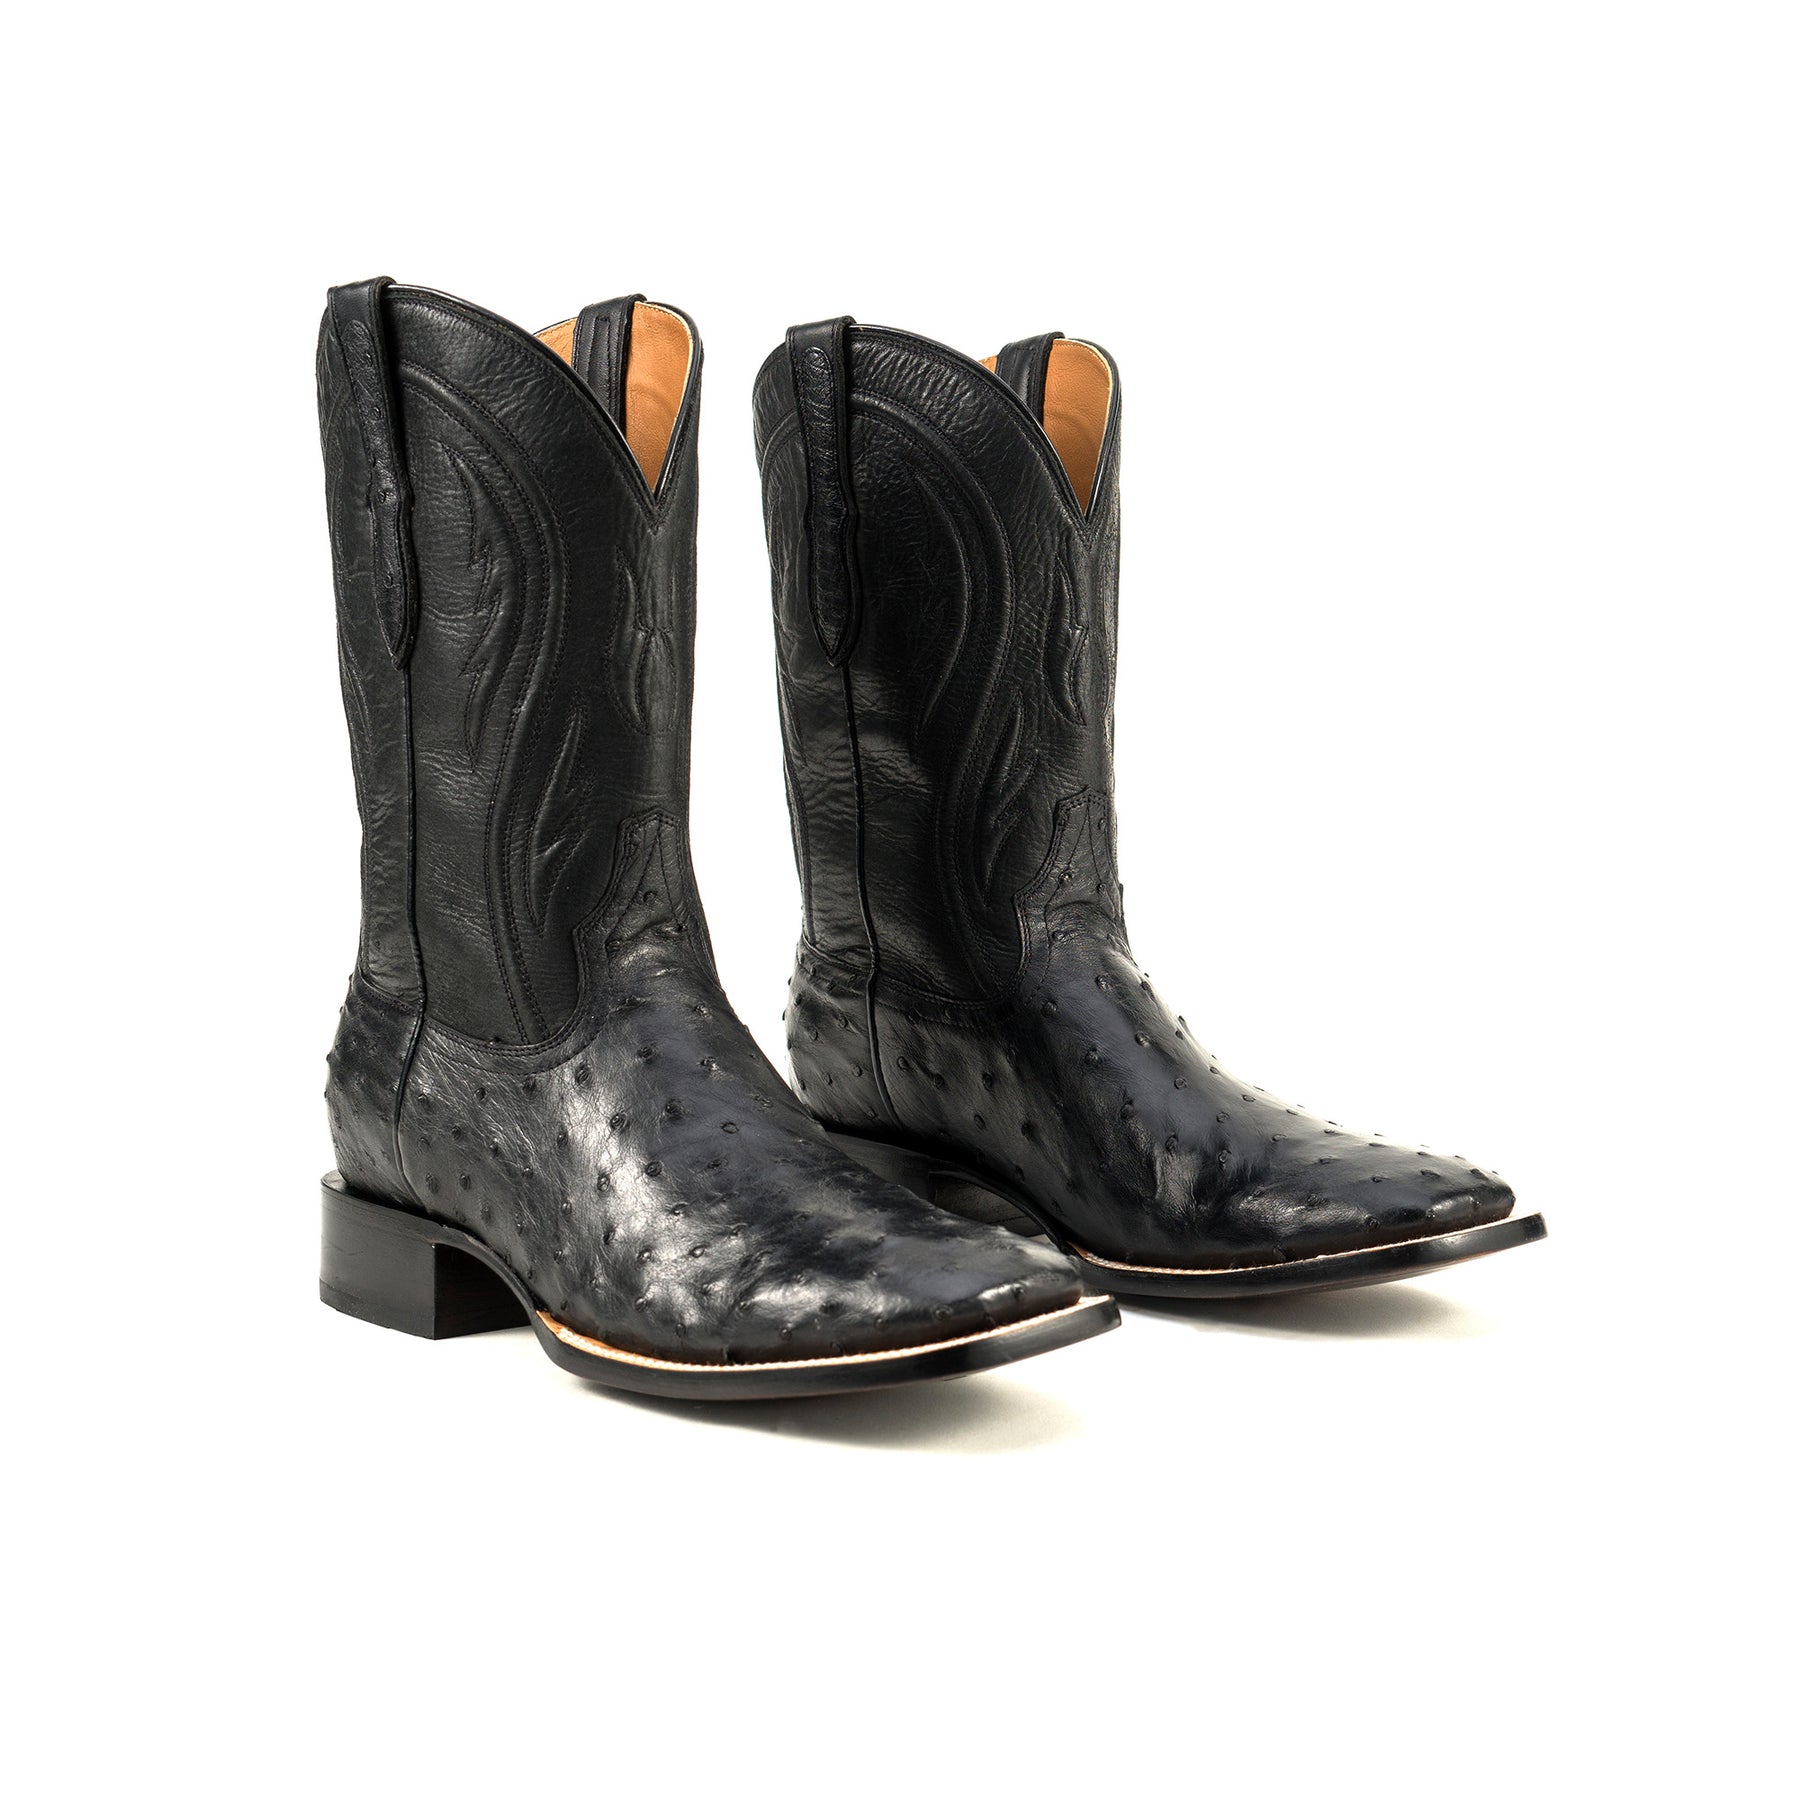 Full-Quill Obsidian Cowboy Boots